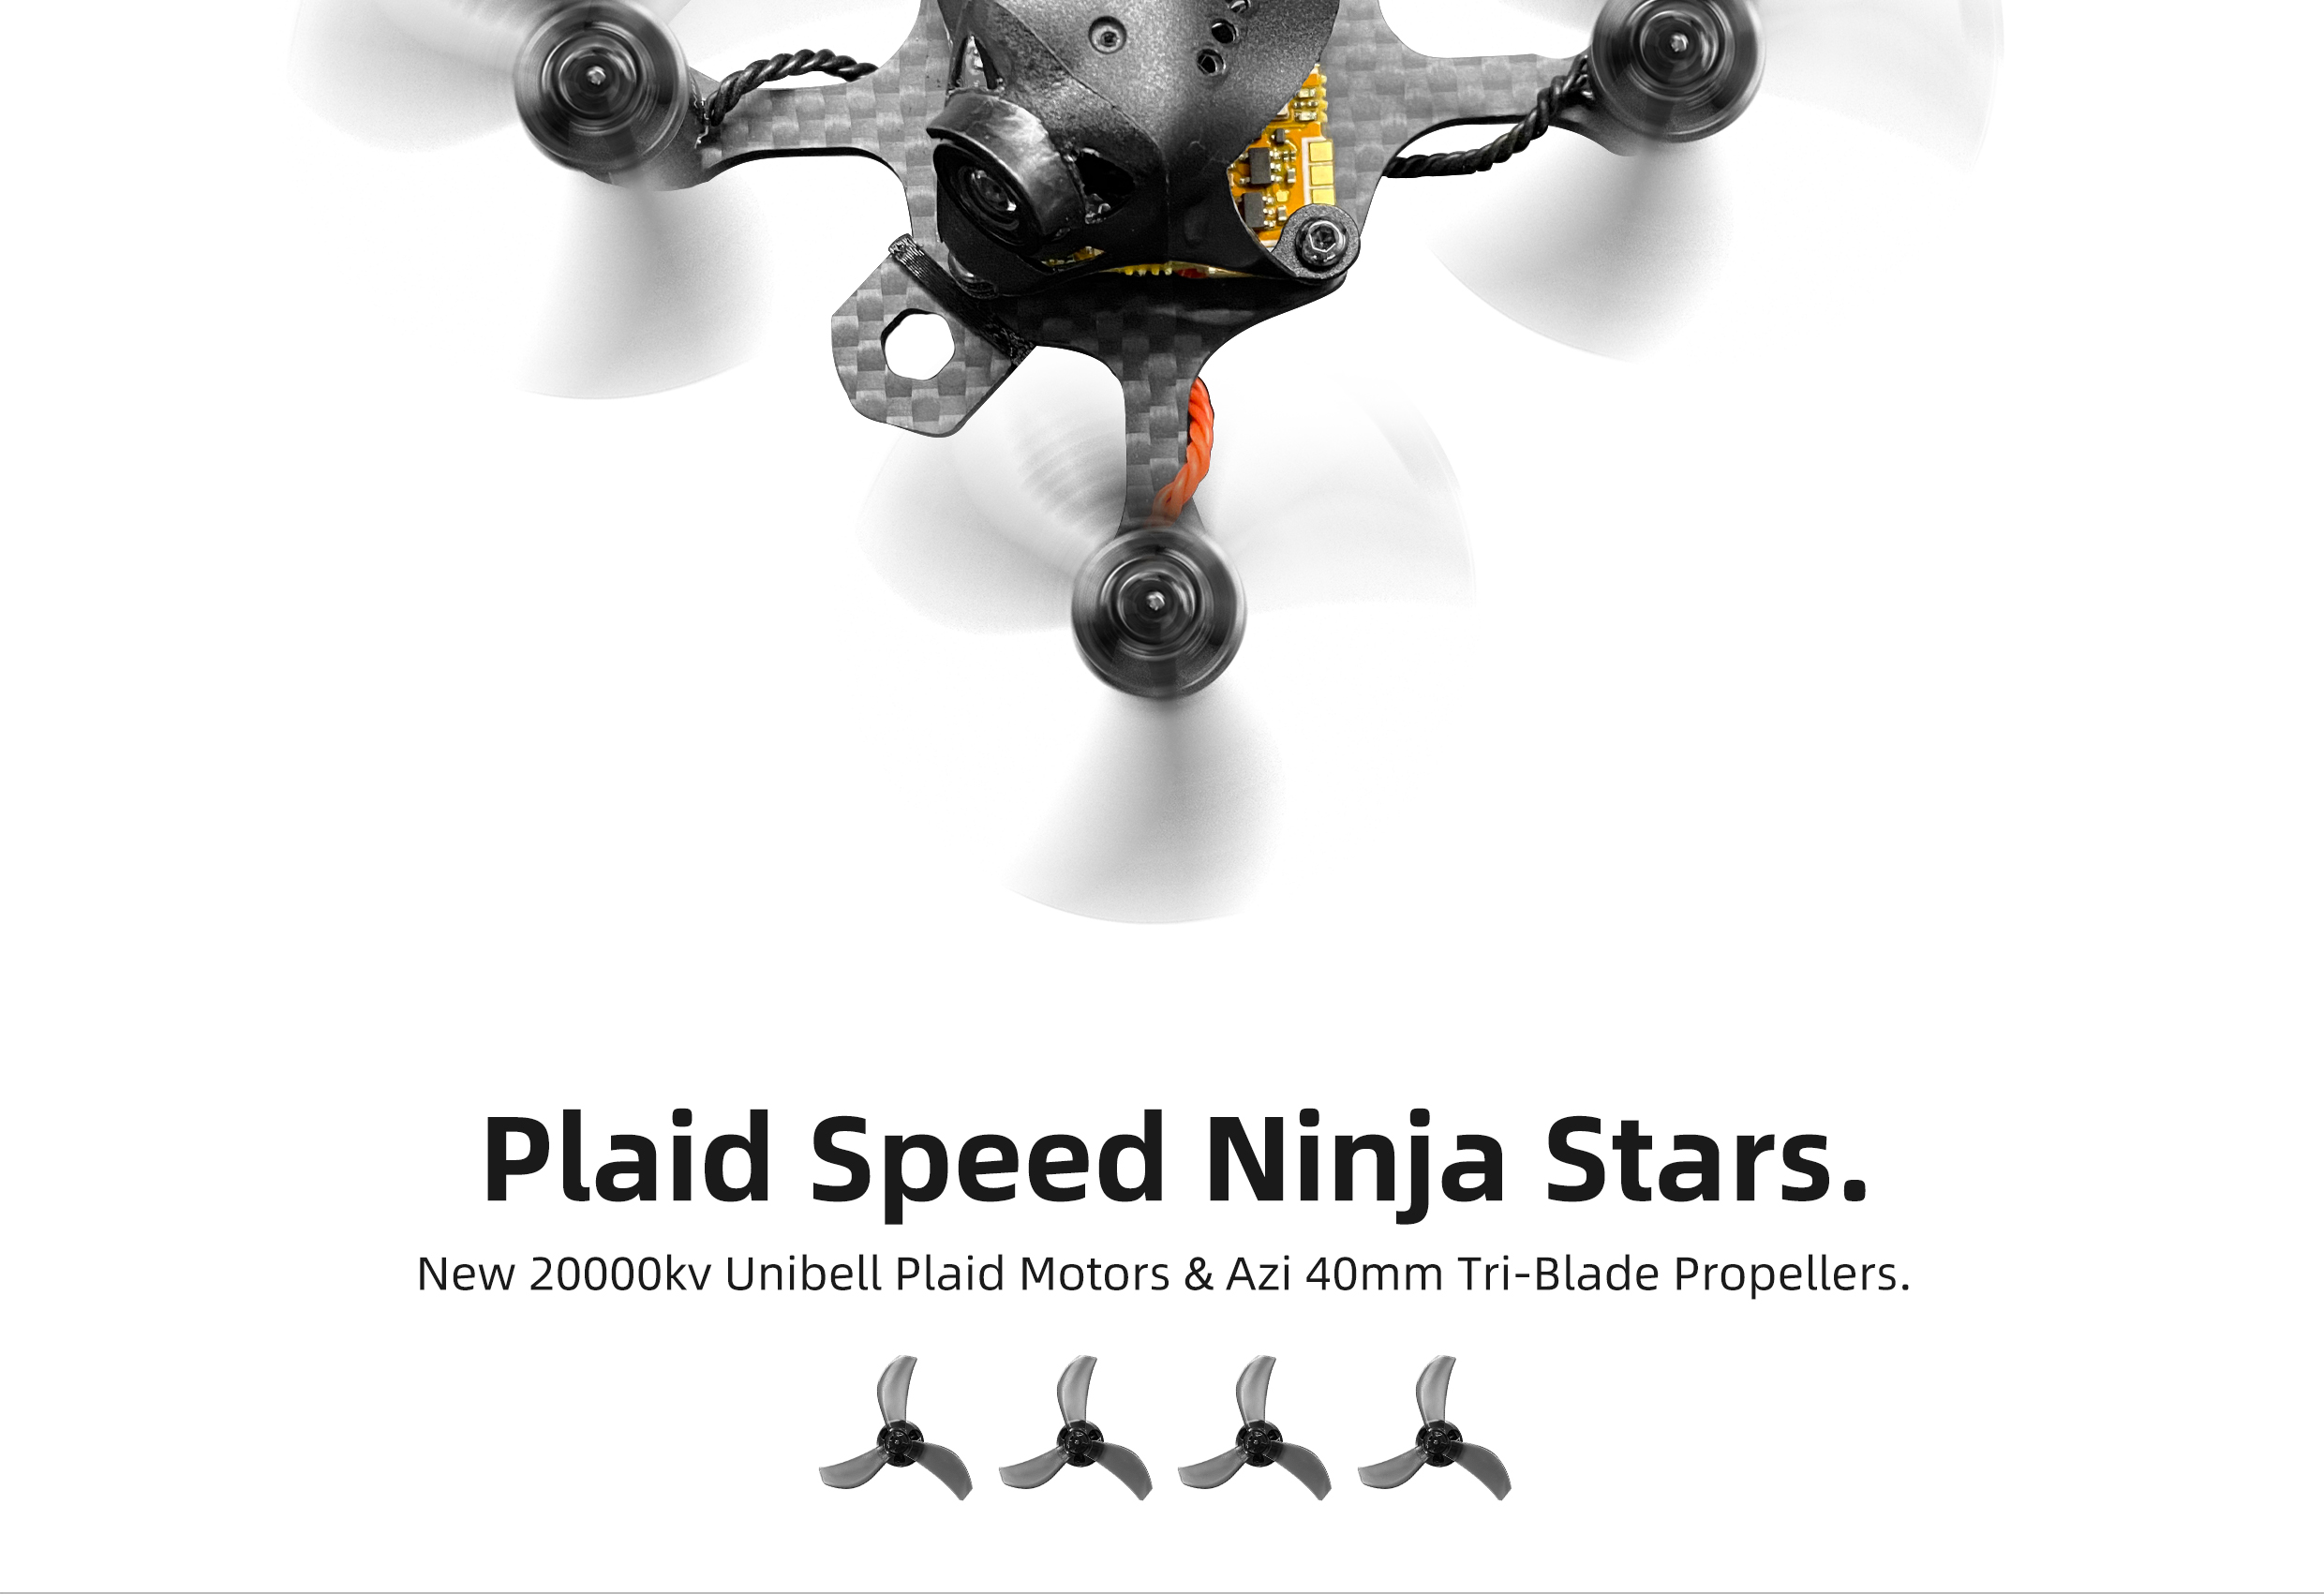 NewBeeDrone Mosquito BLV3 BNF Specifications and Features